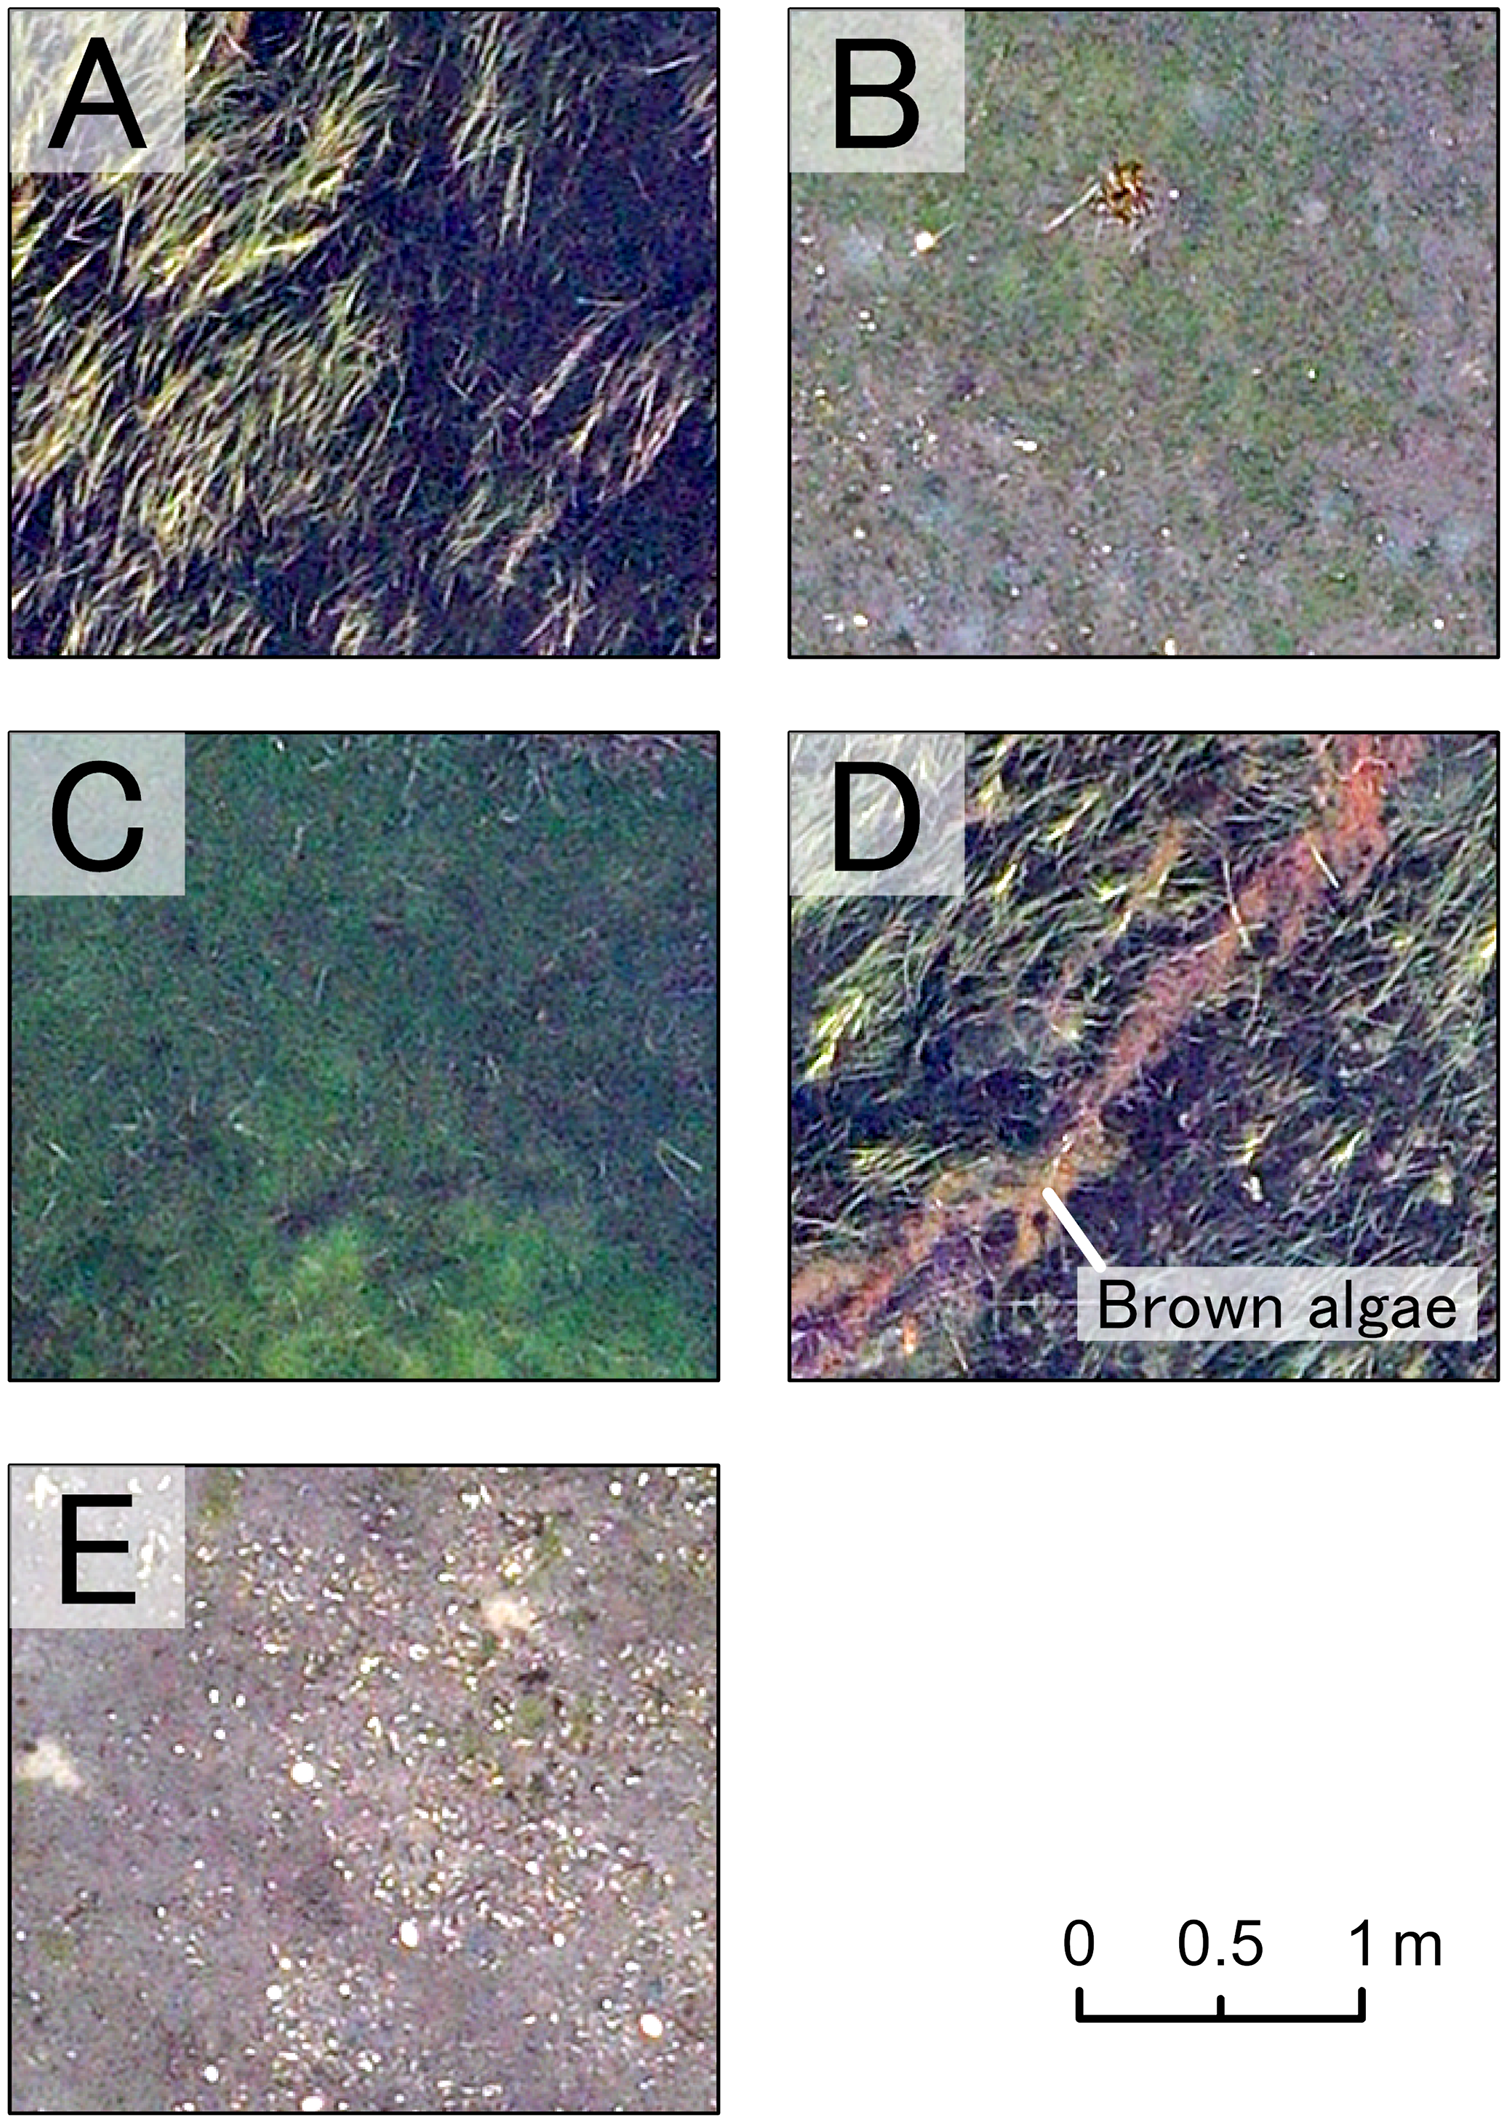 Species level mapping of a seagrass bed using an unmanned aerial